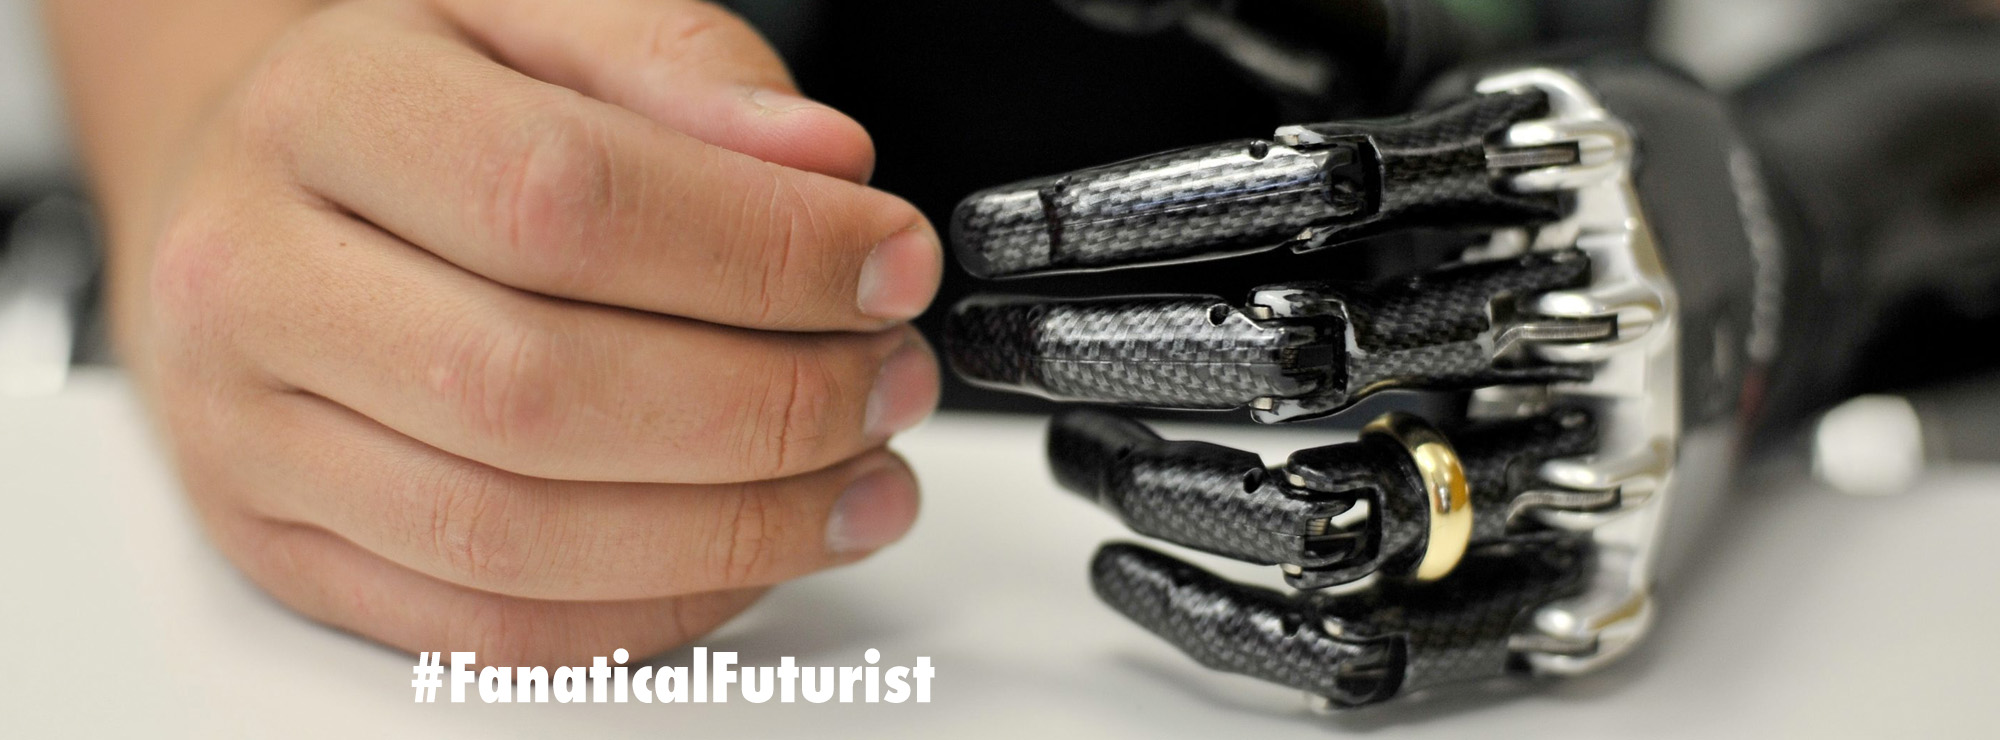 New prosthetic hand project will give amputees back their sense of touch By Futurist and Virtual Keynote Speaker Matthew Griffin